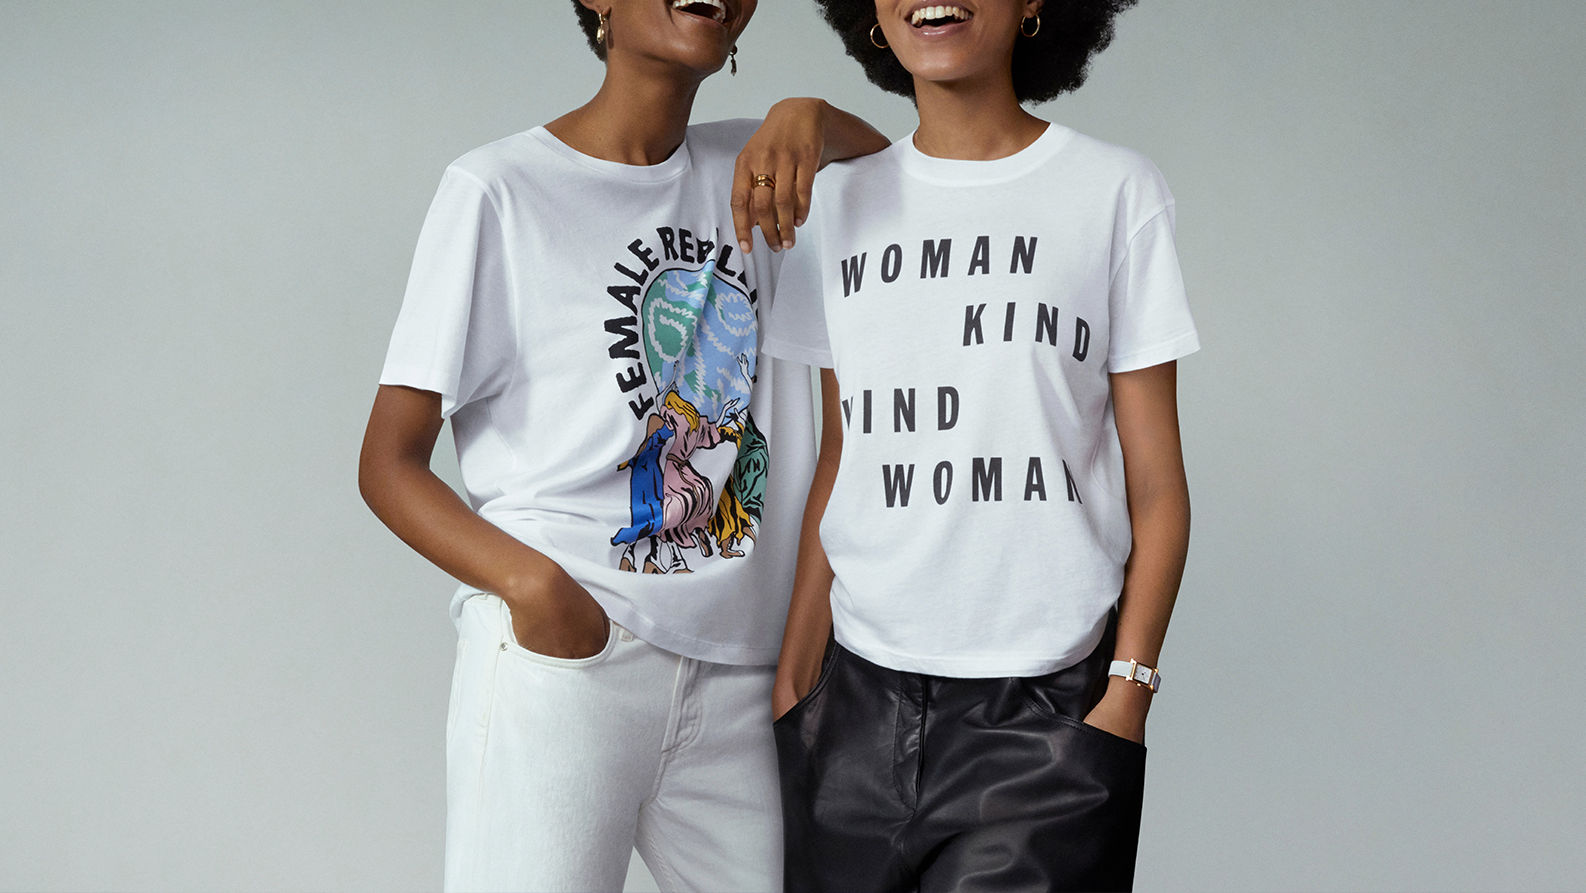 Net-a-Porter unveils a t-shirt collection by 20 female designers for International Women’s Day